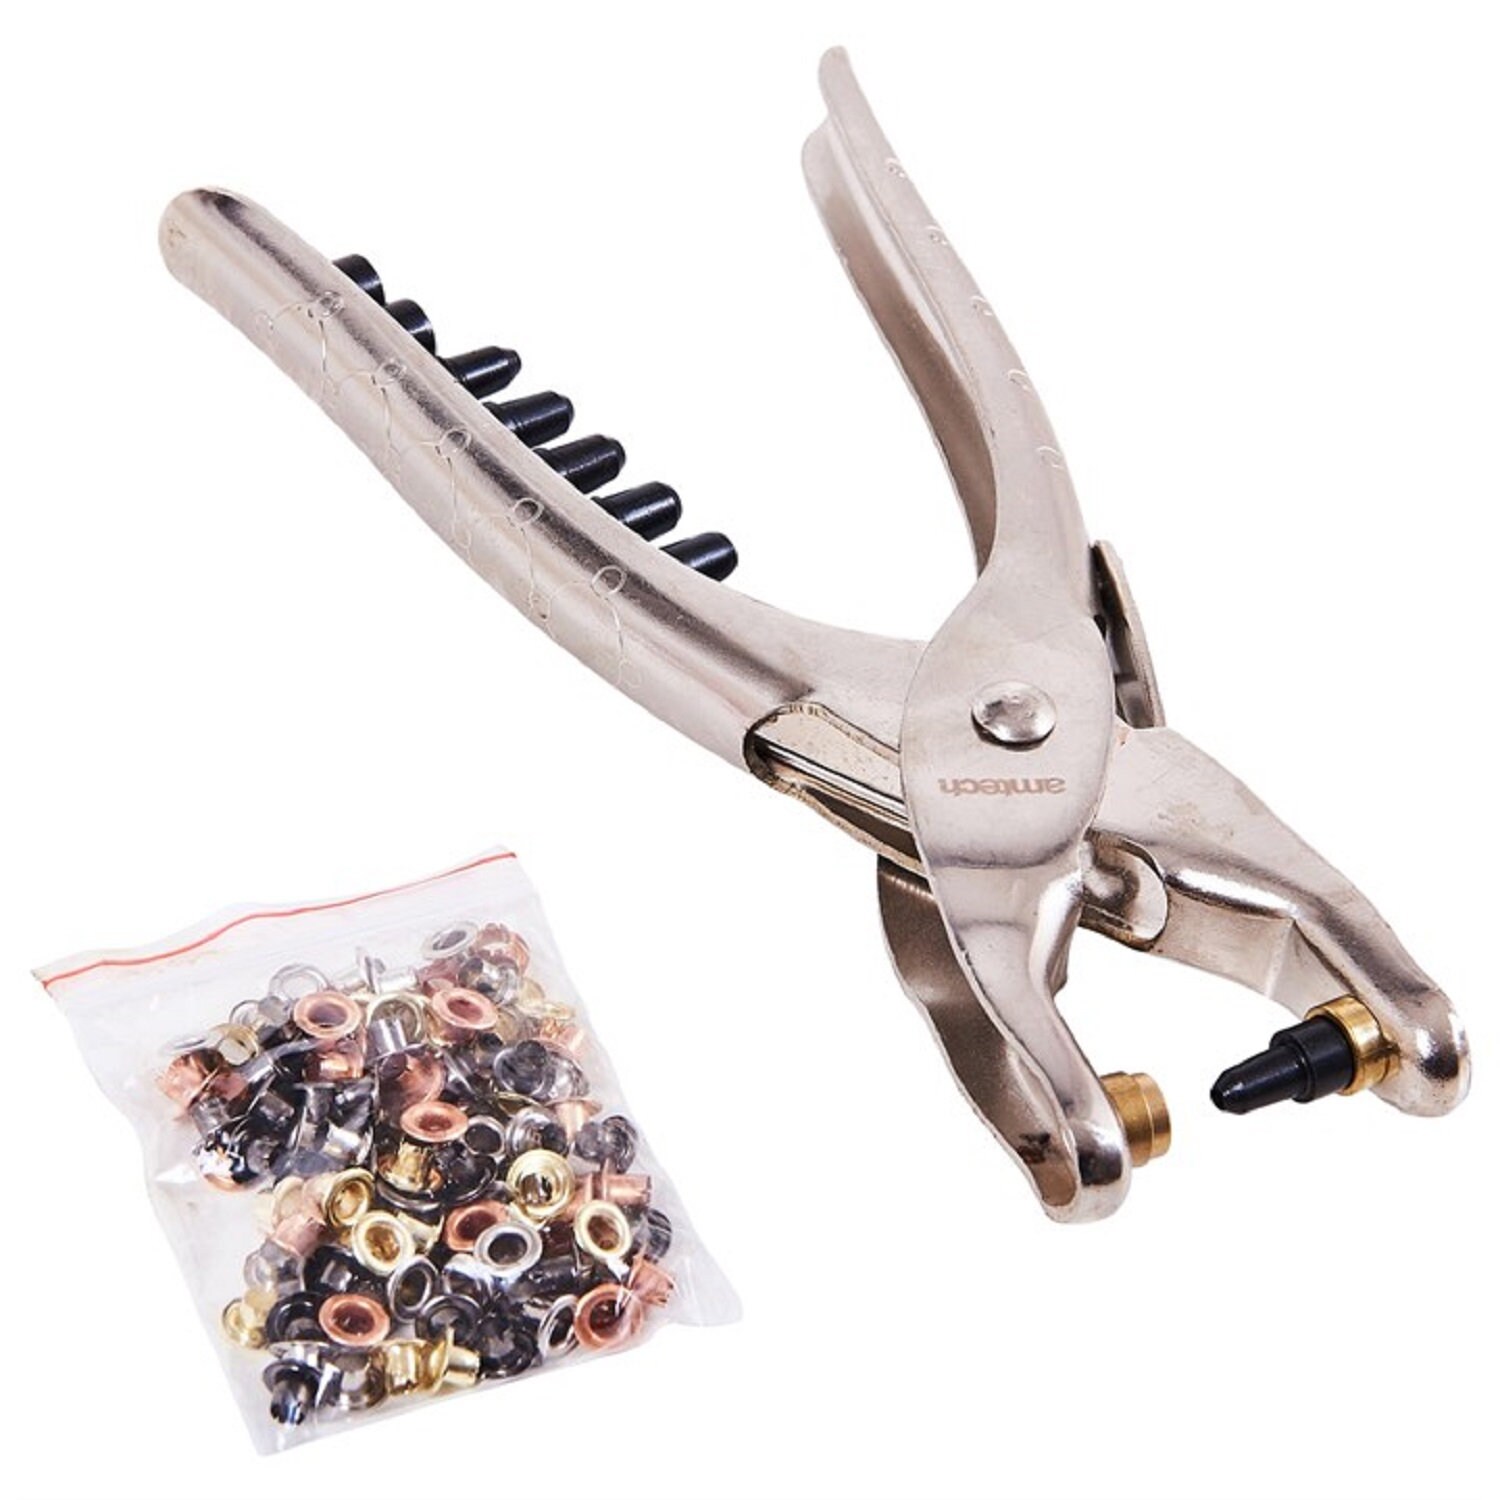 POUPHY Hole Punch Tool, Eyelet Hole Puncher Kits with 3/16 inch 200 Pcs  Gold & Silver Metal Grommets for Leather Fabric Belt Clothes Card Paper  Canvas Decorative Repair